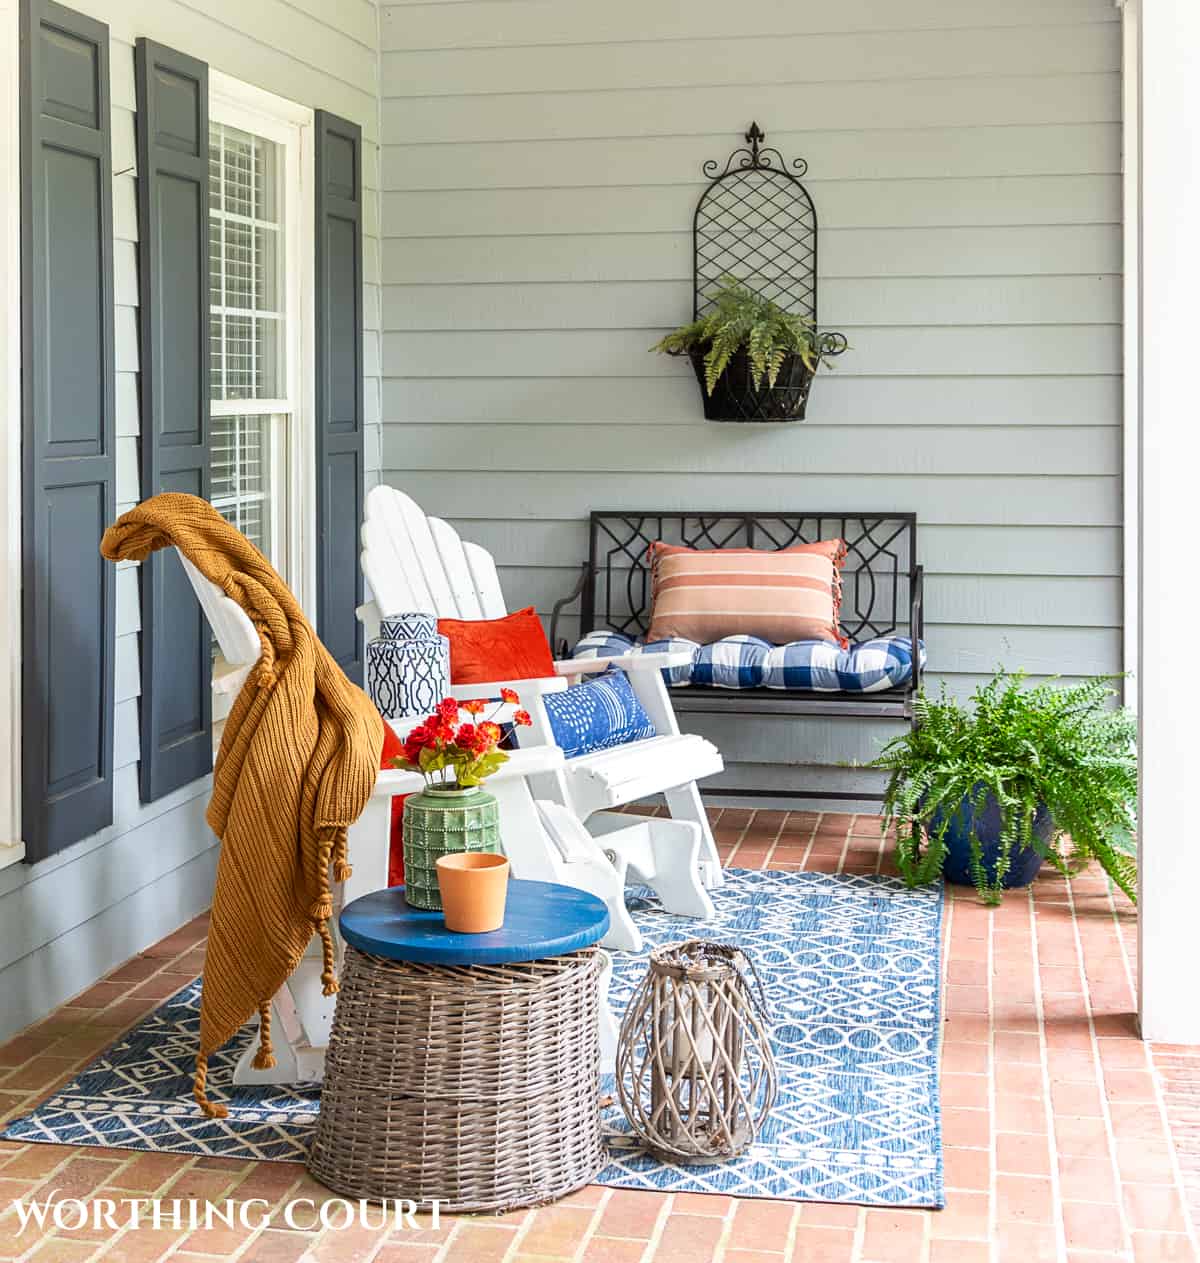 seating area on a large front porch decorated for fall with white gliders and other accessories